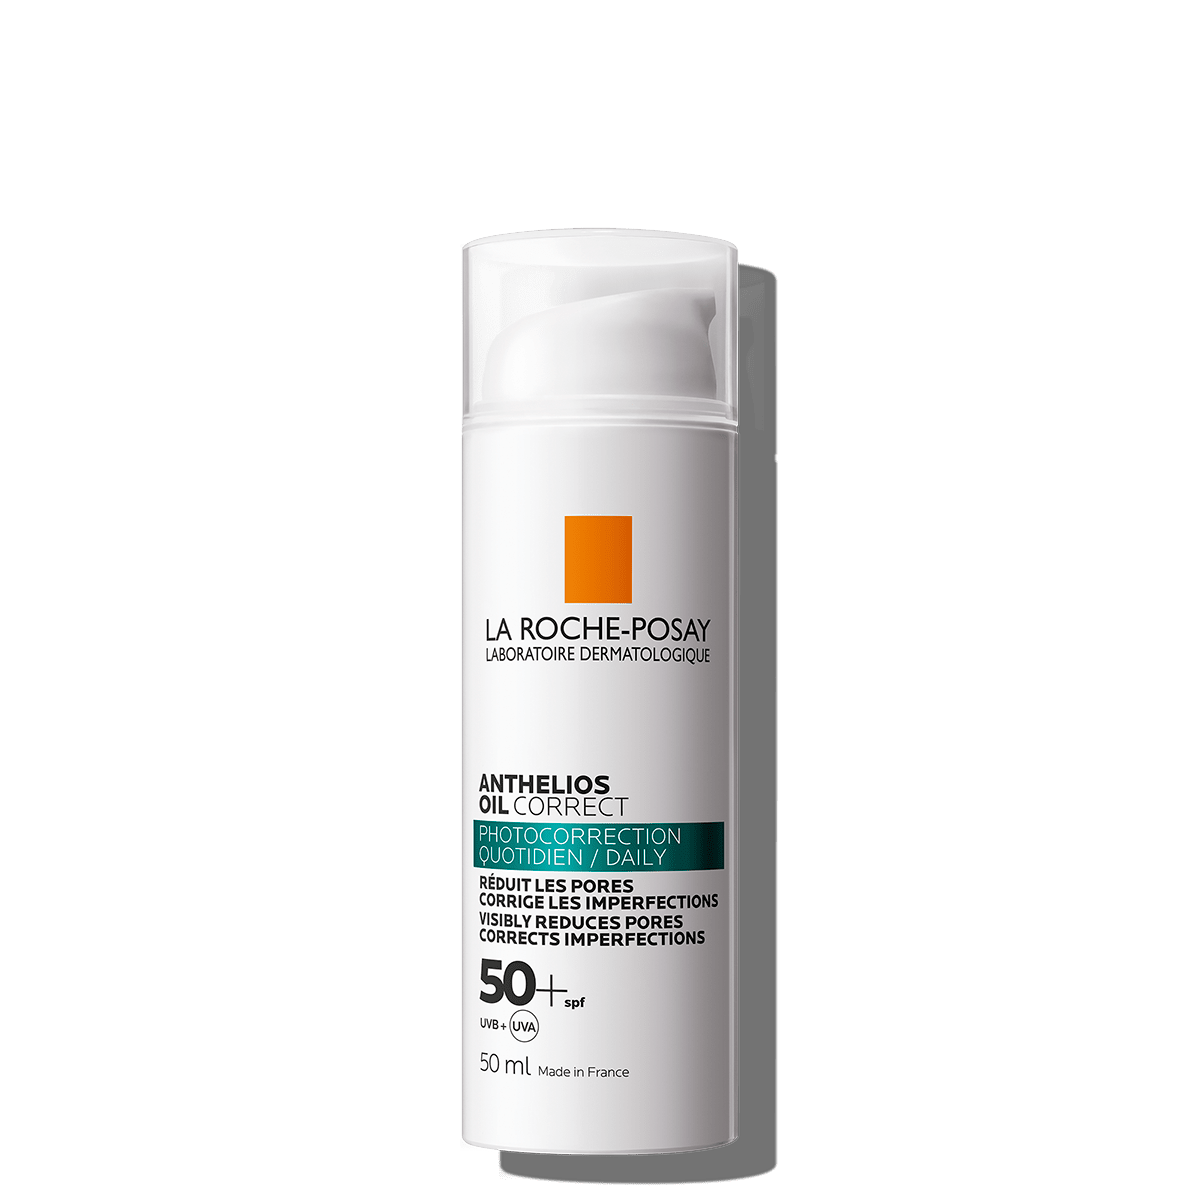 lrp Product Page Sun Anthelios Oil Correct spf50 50ml front